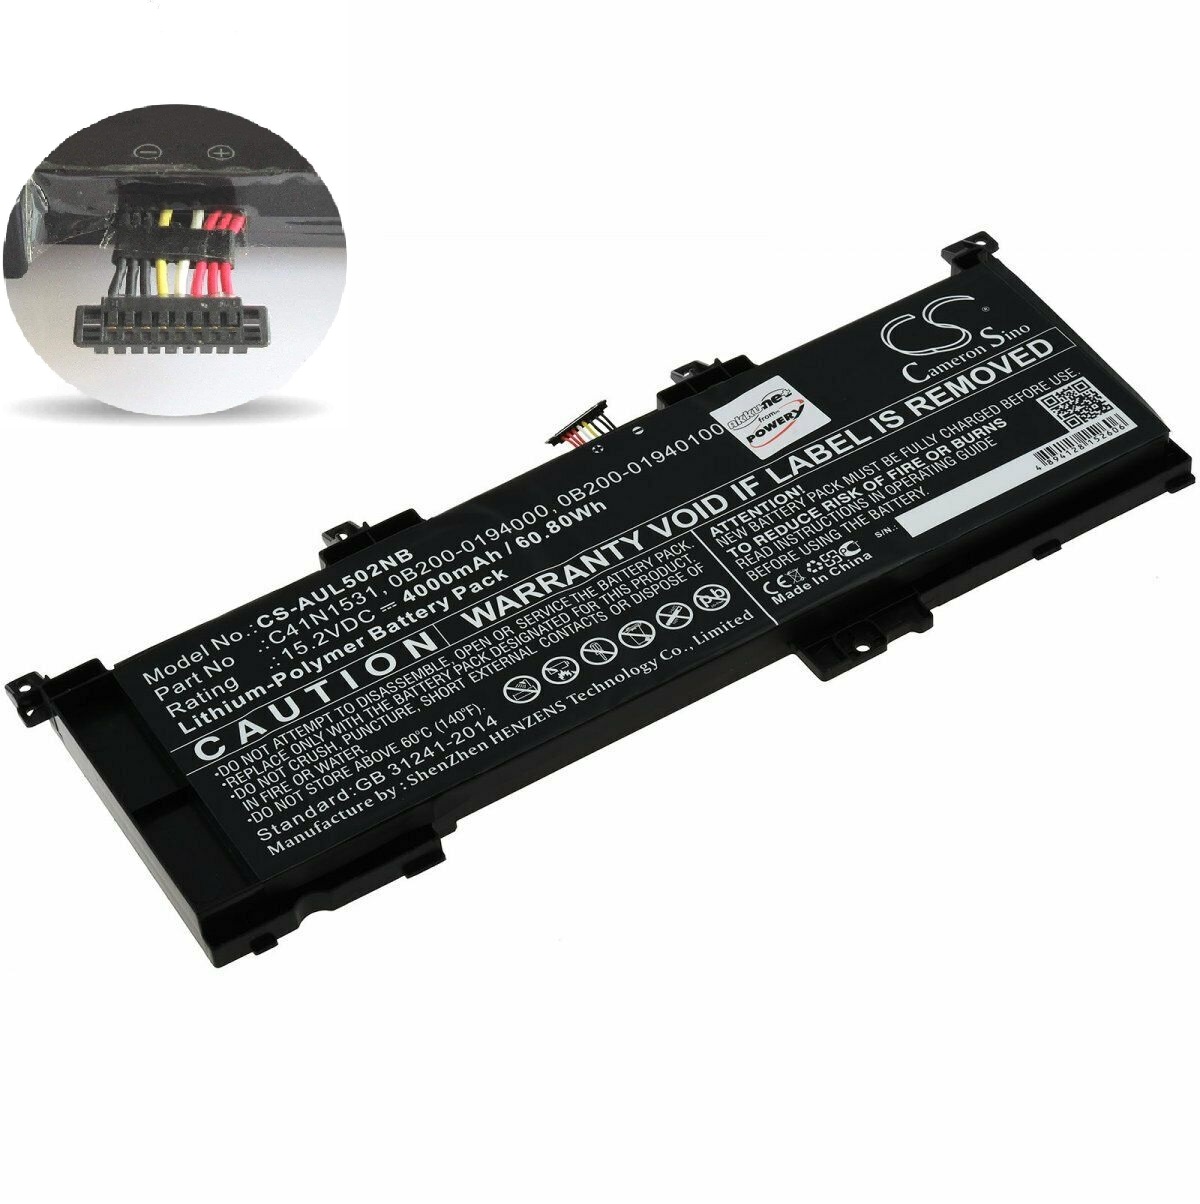 Batterie pour C41N1531 0B200-01940100 Asus GL502VS-1A GL502VS-1E GL502VT-1B GL502VY GL502VY-1A (compatible)